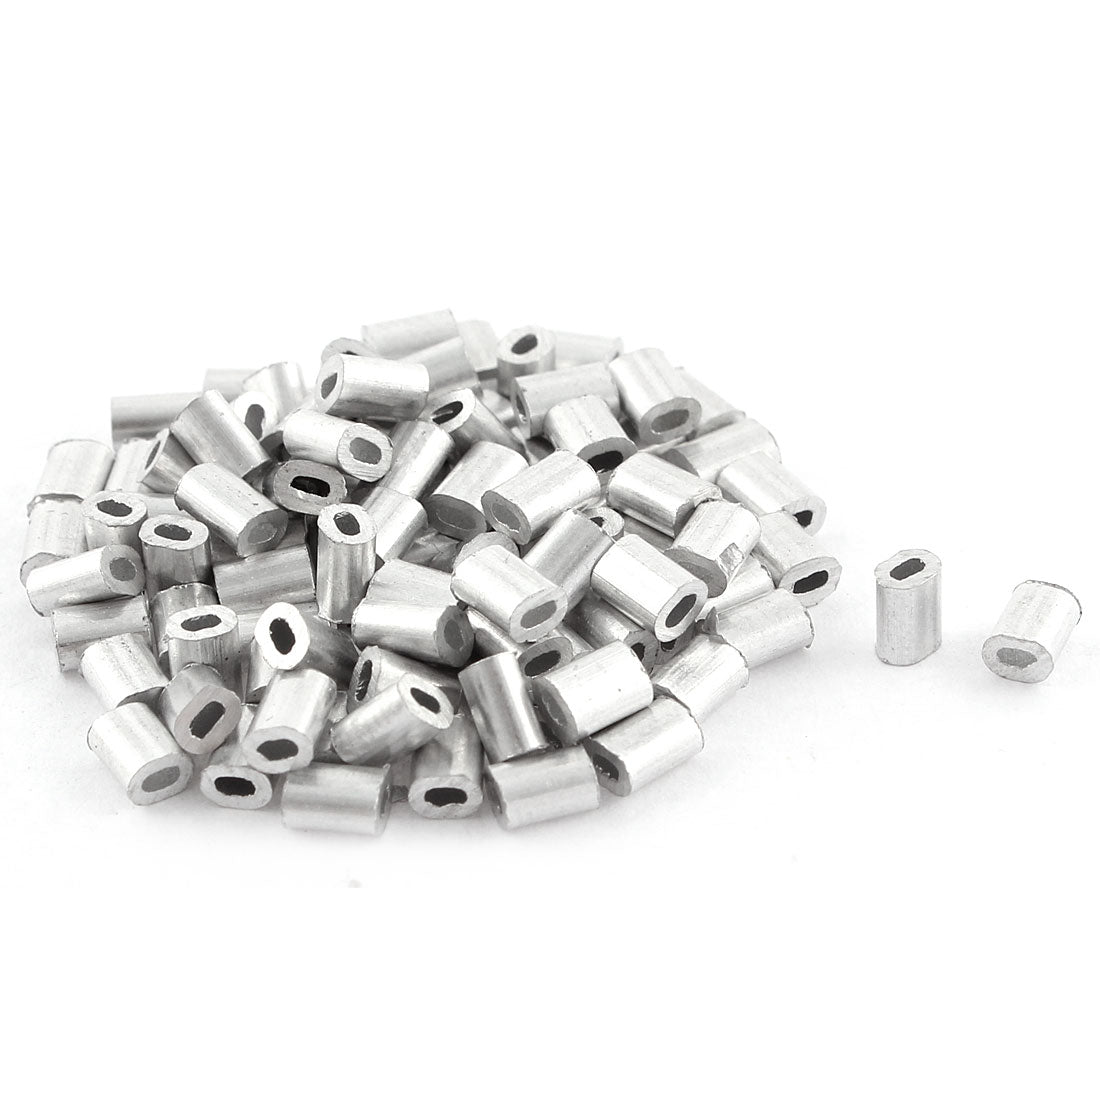 uxcell Uxcell 100pcs Oval Aluminum Sleeves Clamps for 0.5mm Wire Rope Swage Clip